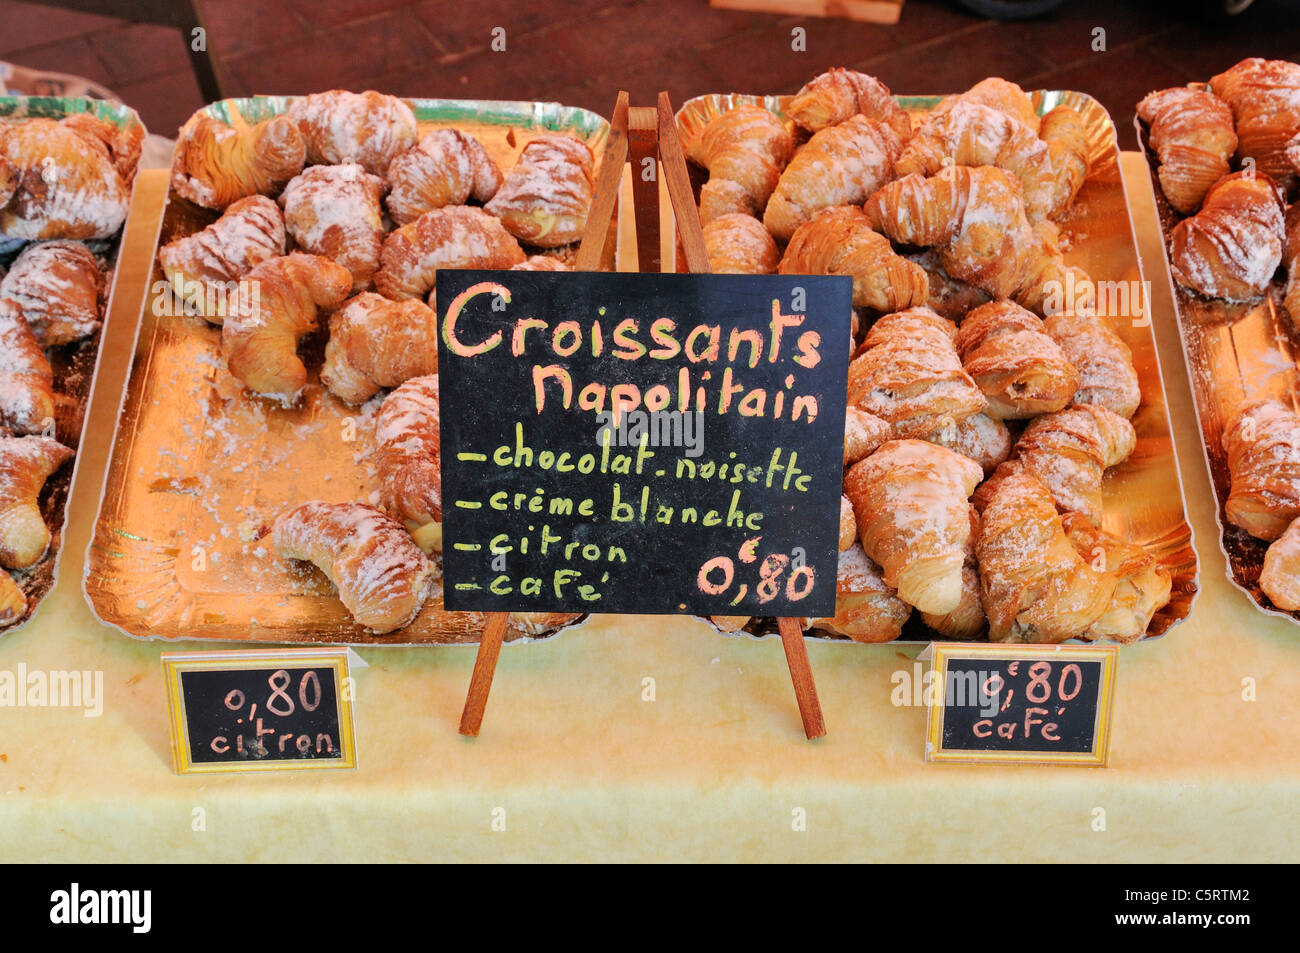 Europe, France, Provence, Alpes Maritimes, Cote d'Azur, Nice, Fresh baked crossaints with price tag on market stall Stock Photo